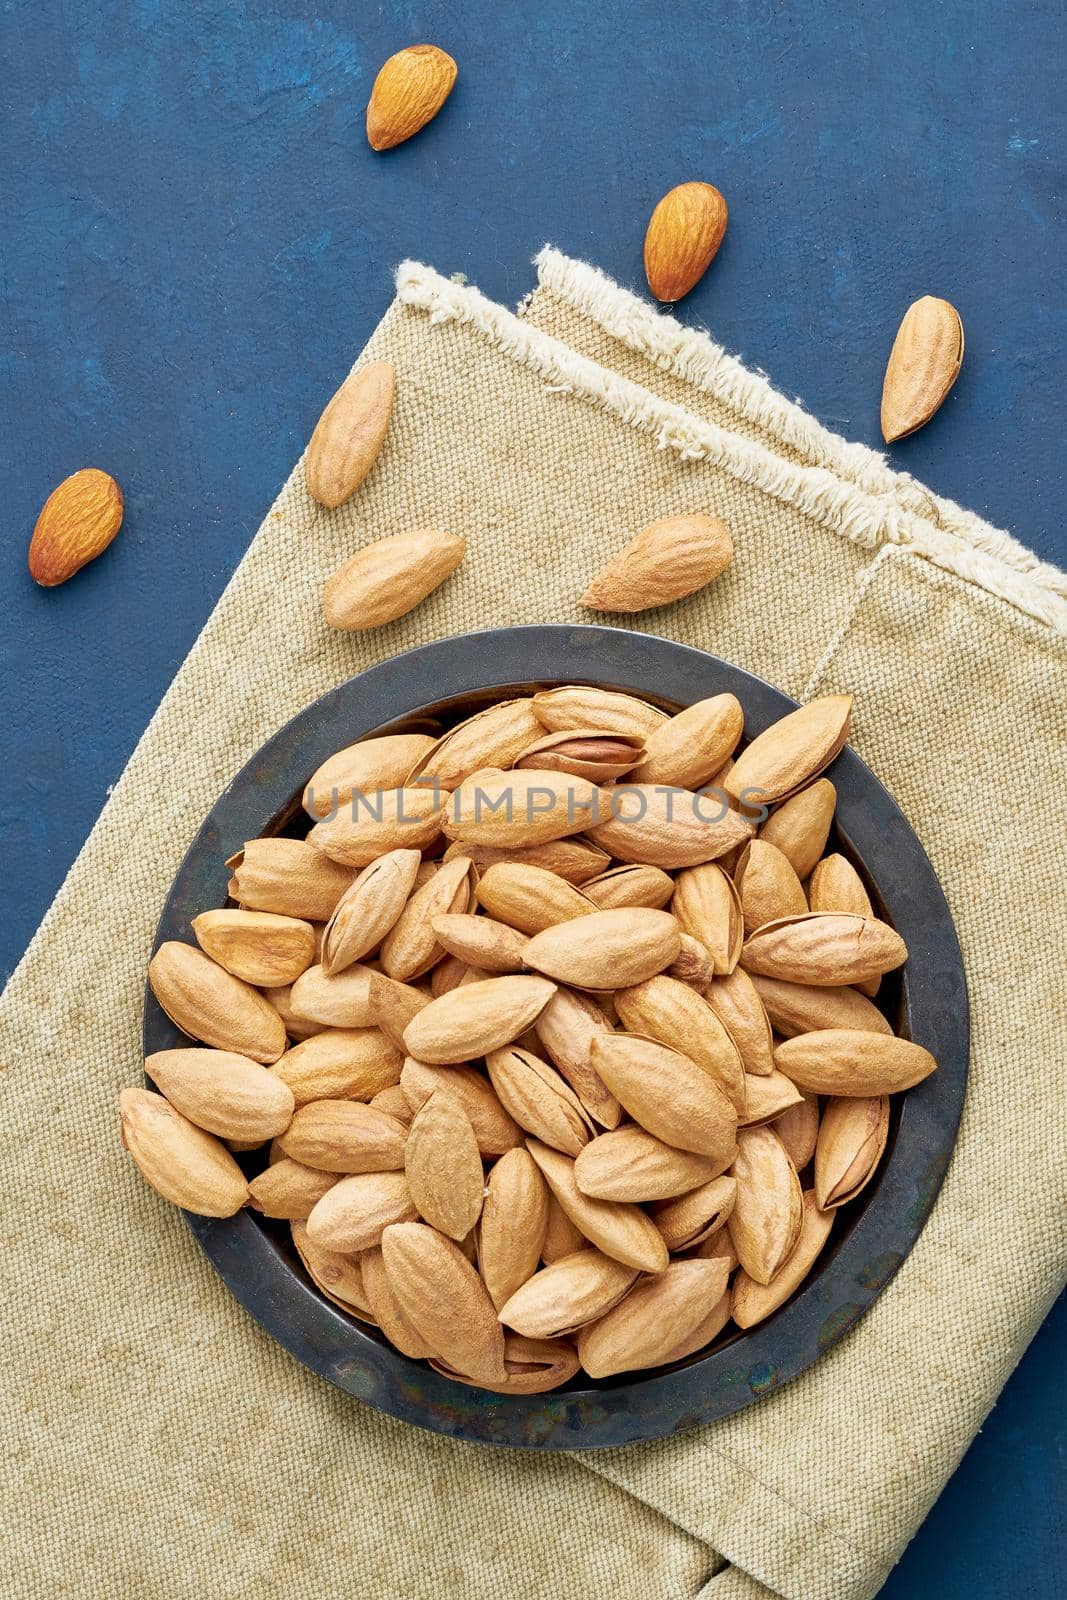 Top view plate with almonds in endocarp, bowl with drupe in shell on a linen napkin on a dark blue background, overhead, copy space, close up, vertical